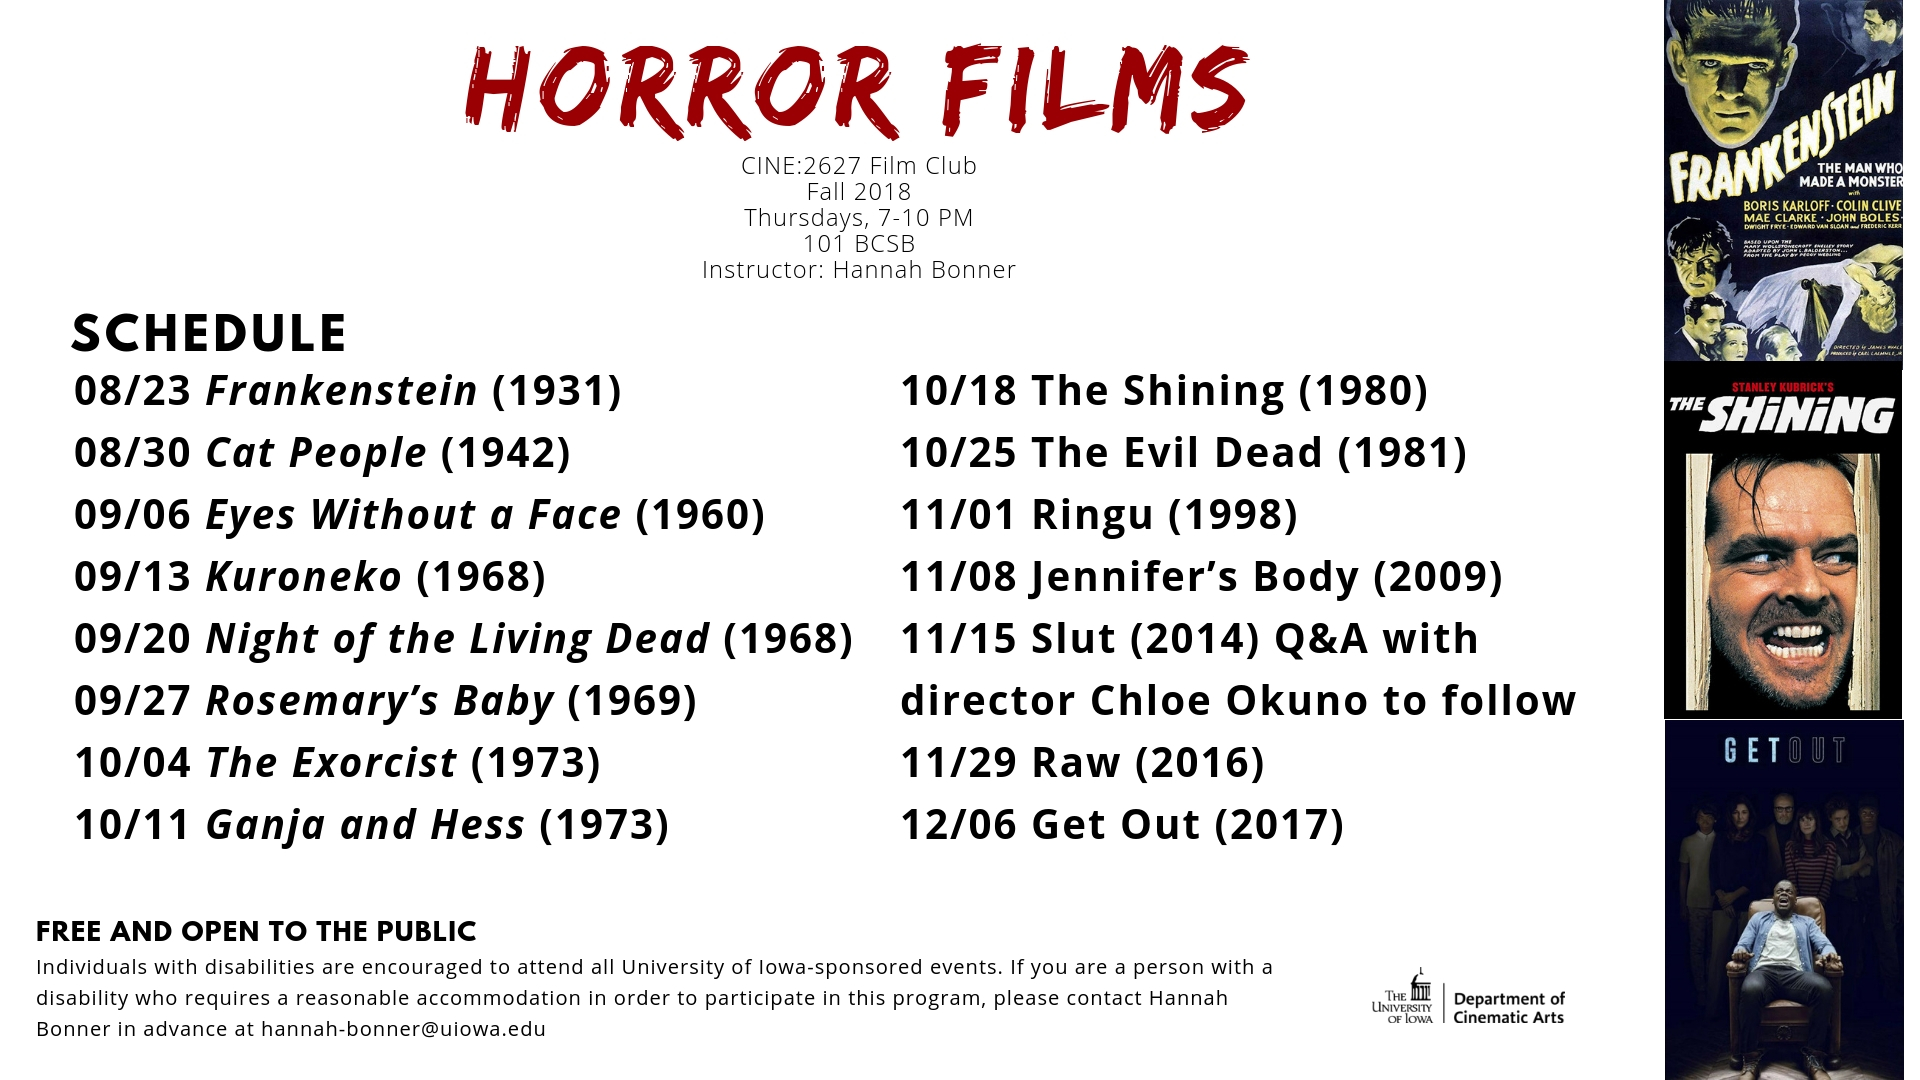 Horror Films: 08/23 Frankenstein (1931) 08/30 Cat People (1942) 09/06 Eyes Without a Face (1960) 09/13 Kuroneko (1968) 09/20 Night of the Living Dead (1968) 09/27 Rosemary’s Baby (1969) 10/04 The Exorcist (1973) 10/11 Ganja and Hess (1973) 10/18 The Shining (1980) 10/25 The Evil Dead (1981) 11/01 Ringu (1998) 11/08 Jennifer’s Body (2009) 11/15 Slut (2014) Q&A with director Chloe Okuno to follow 11/29 Raw (2016) 12/06 Get Out (2017)